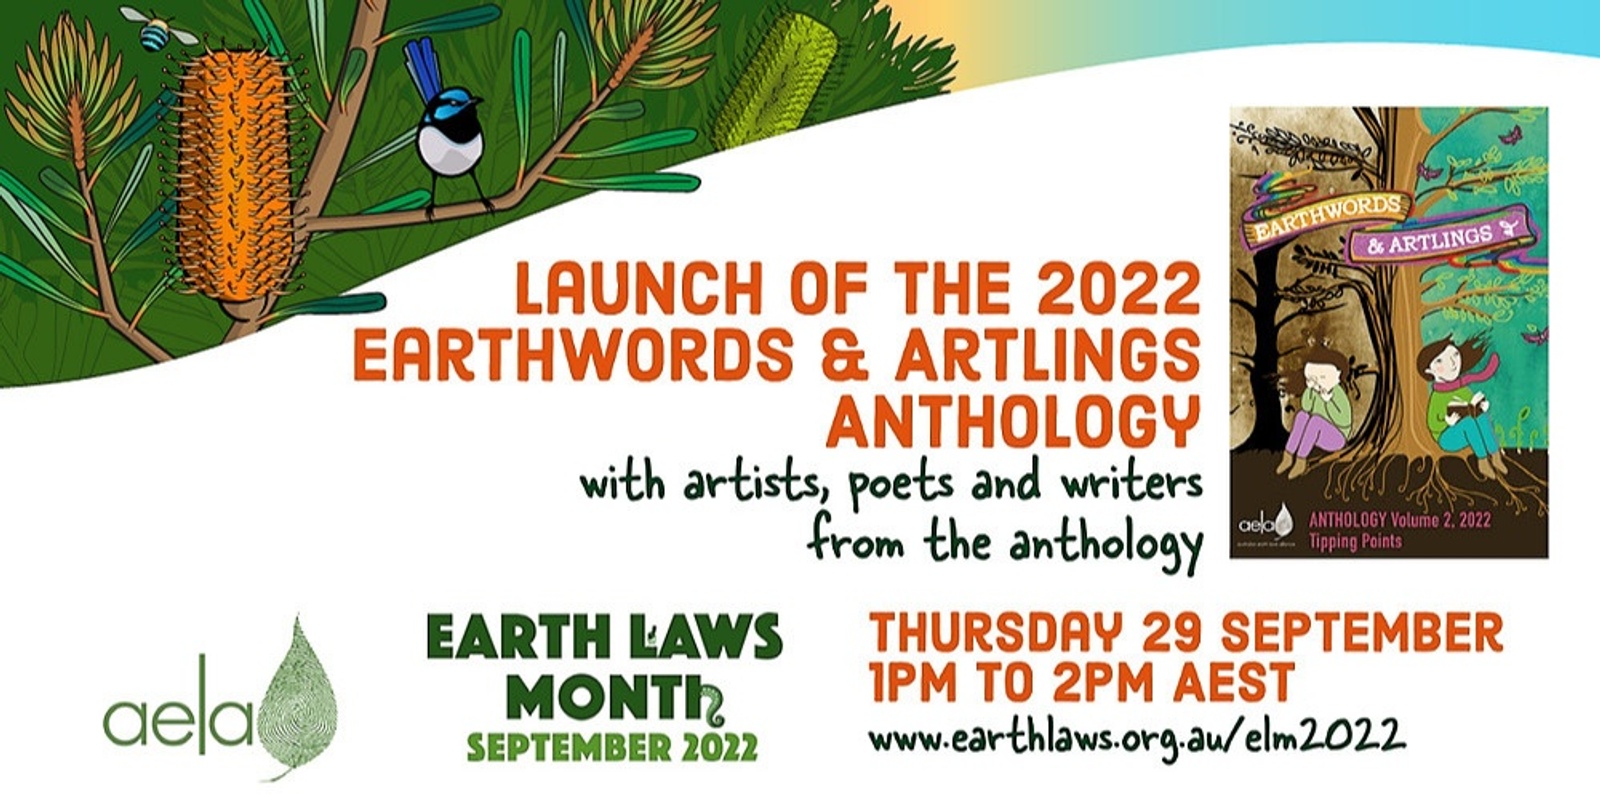 Launch of the 2022 Earthwords & Artlings Anthology